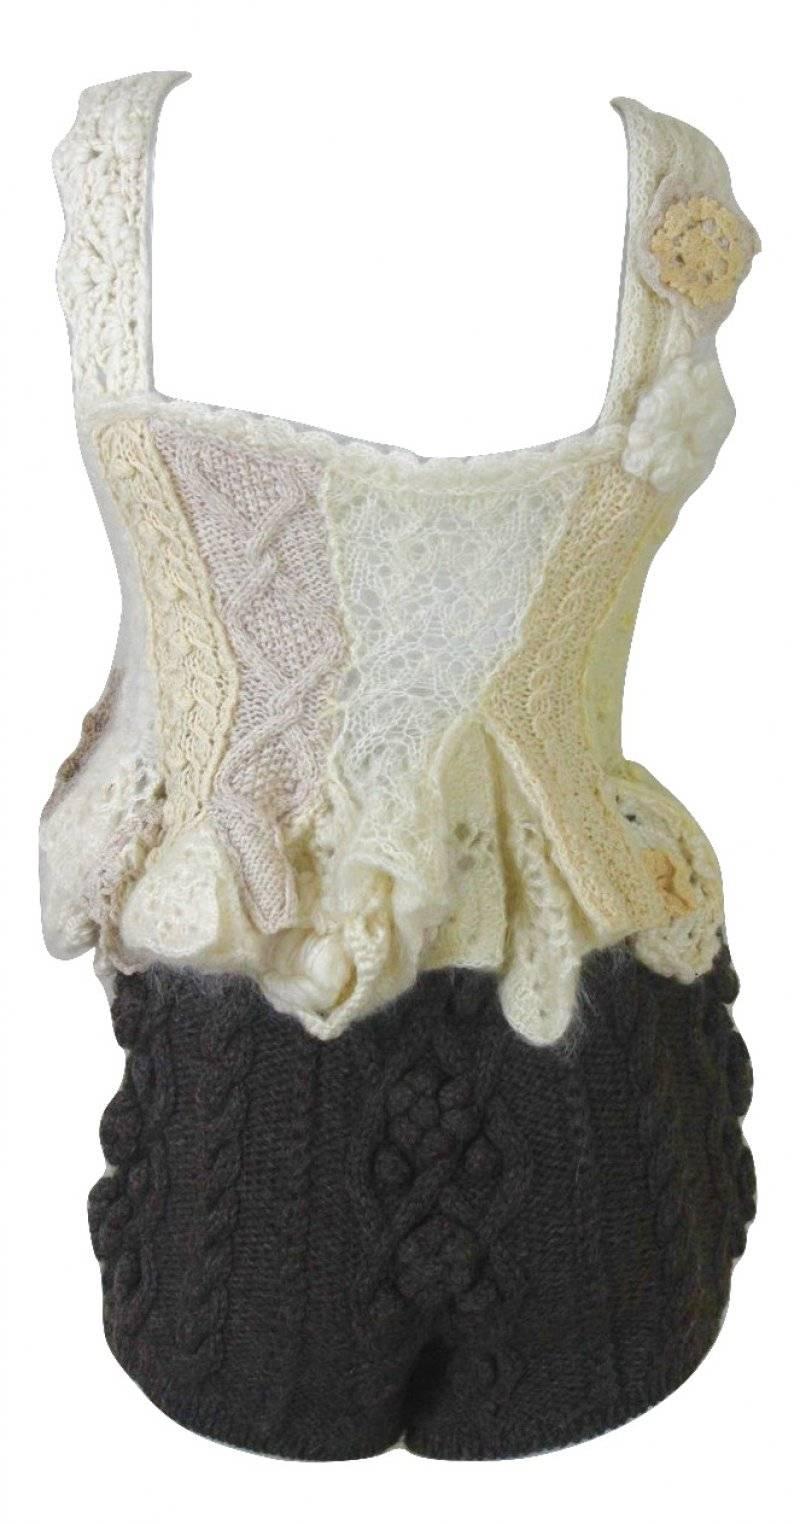 Tao Comme des Garcons 2006 Collection Handknit Corset and Shorts